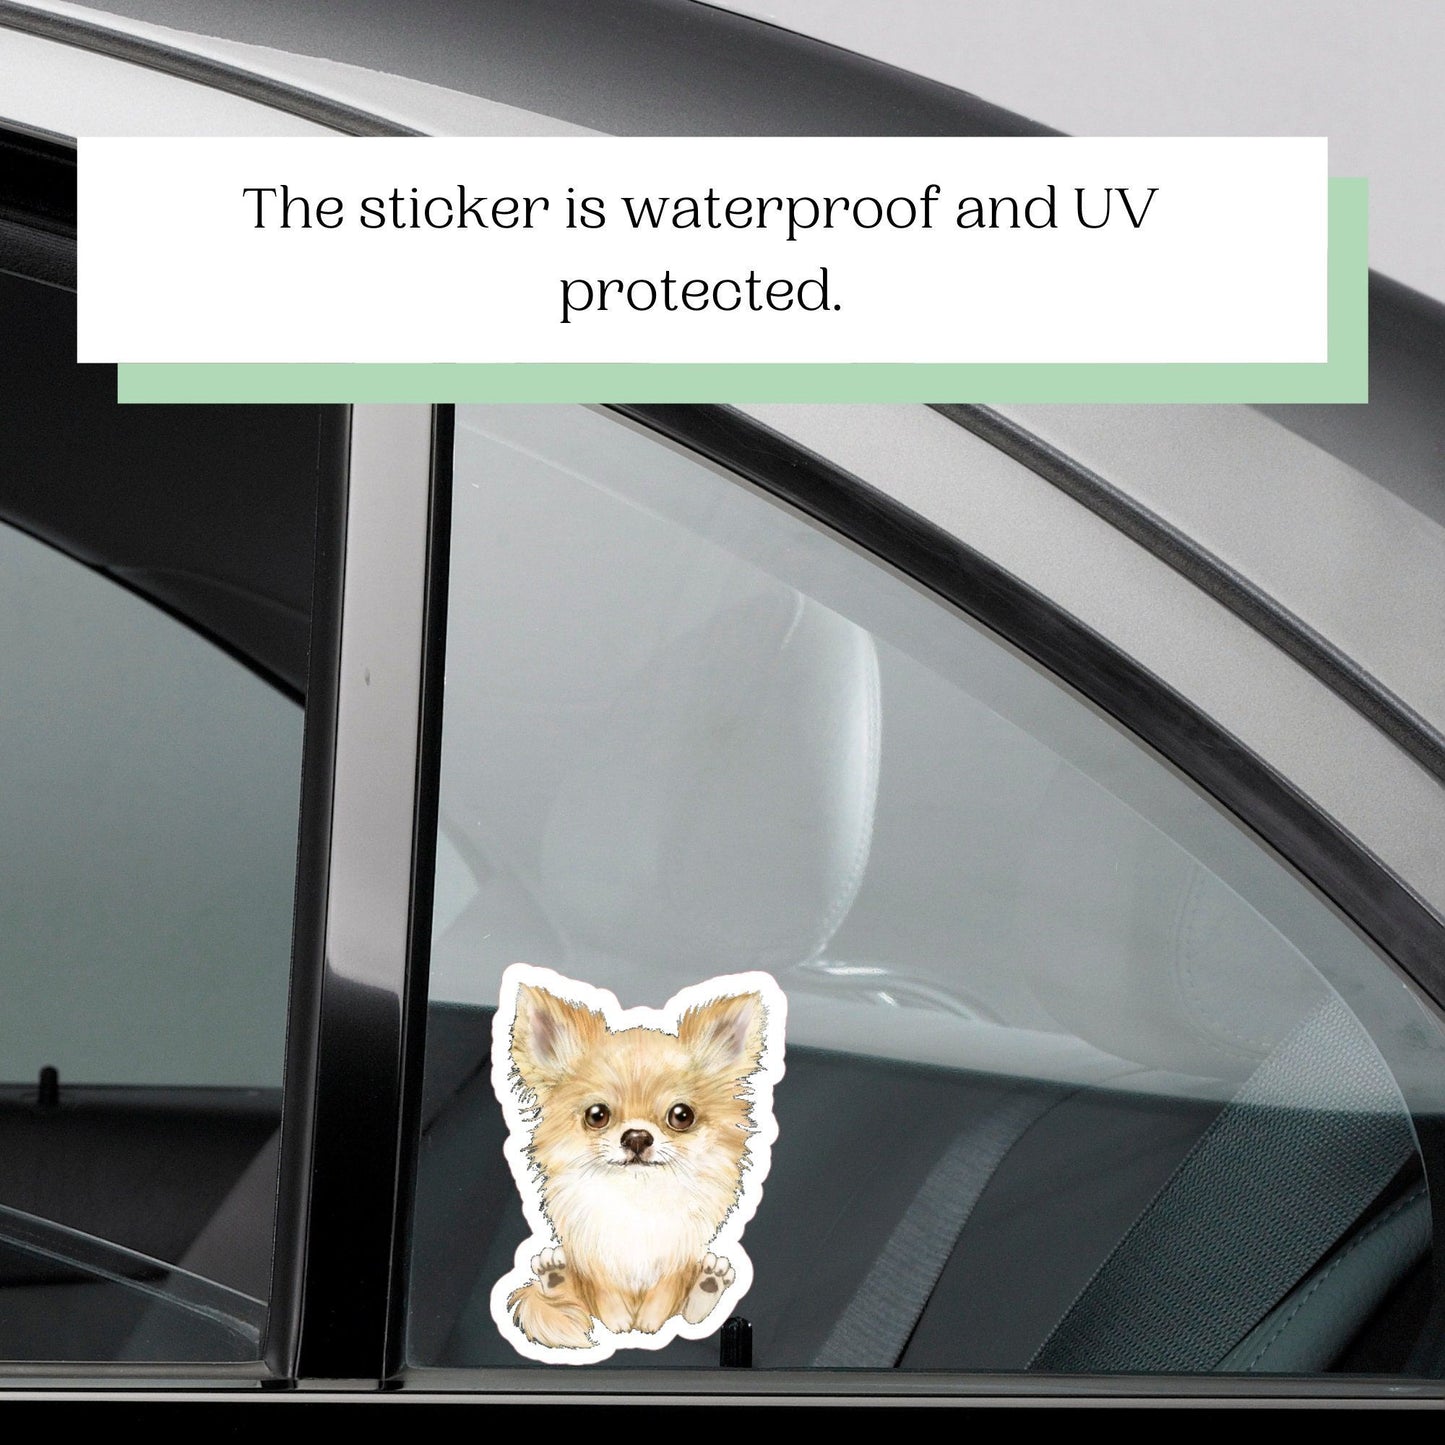 Pomeranian Puppy Dog Sticker Chihuahua Decal Long Haired Tan Full Color Cartoon Waterproof Dog Lover Sticker for Car Water Bottle Laptop